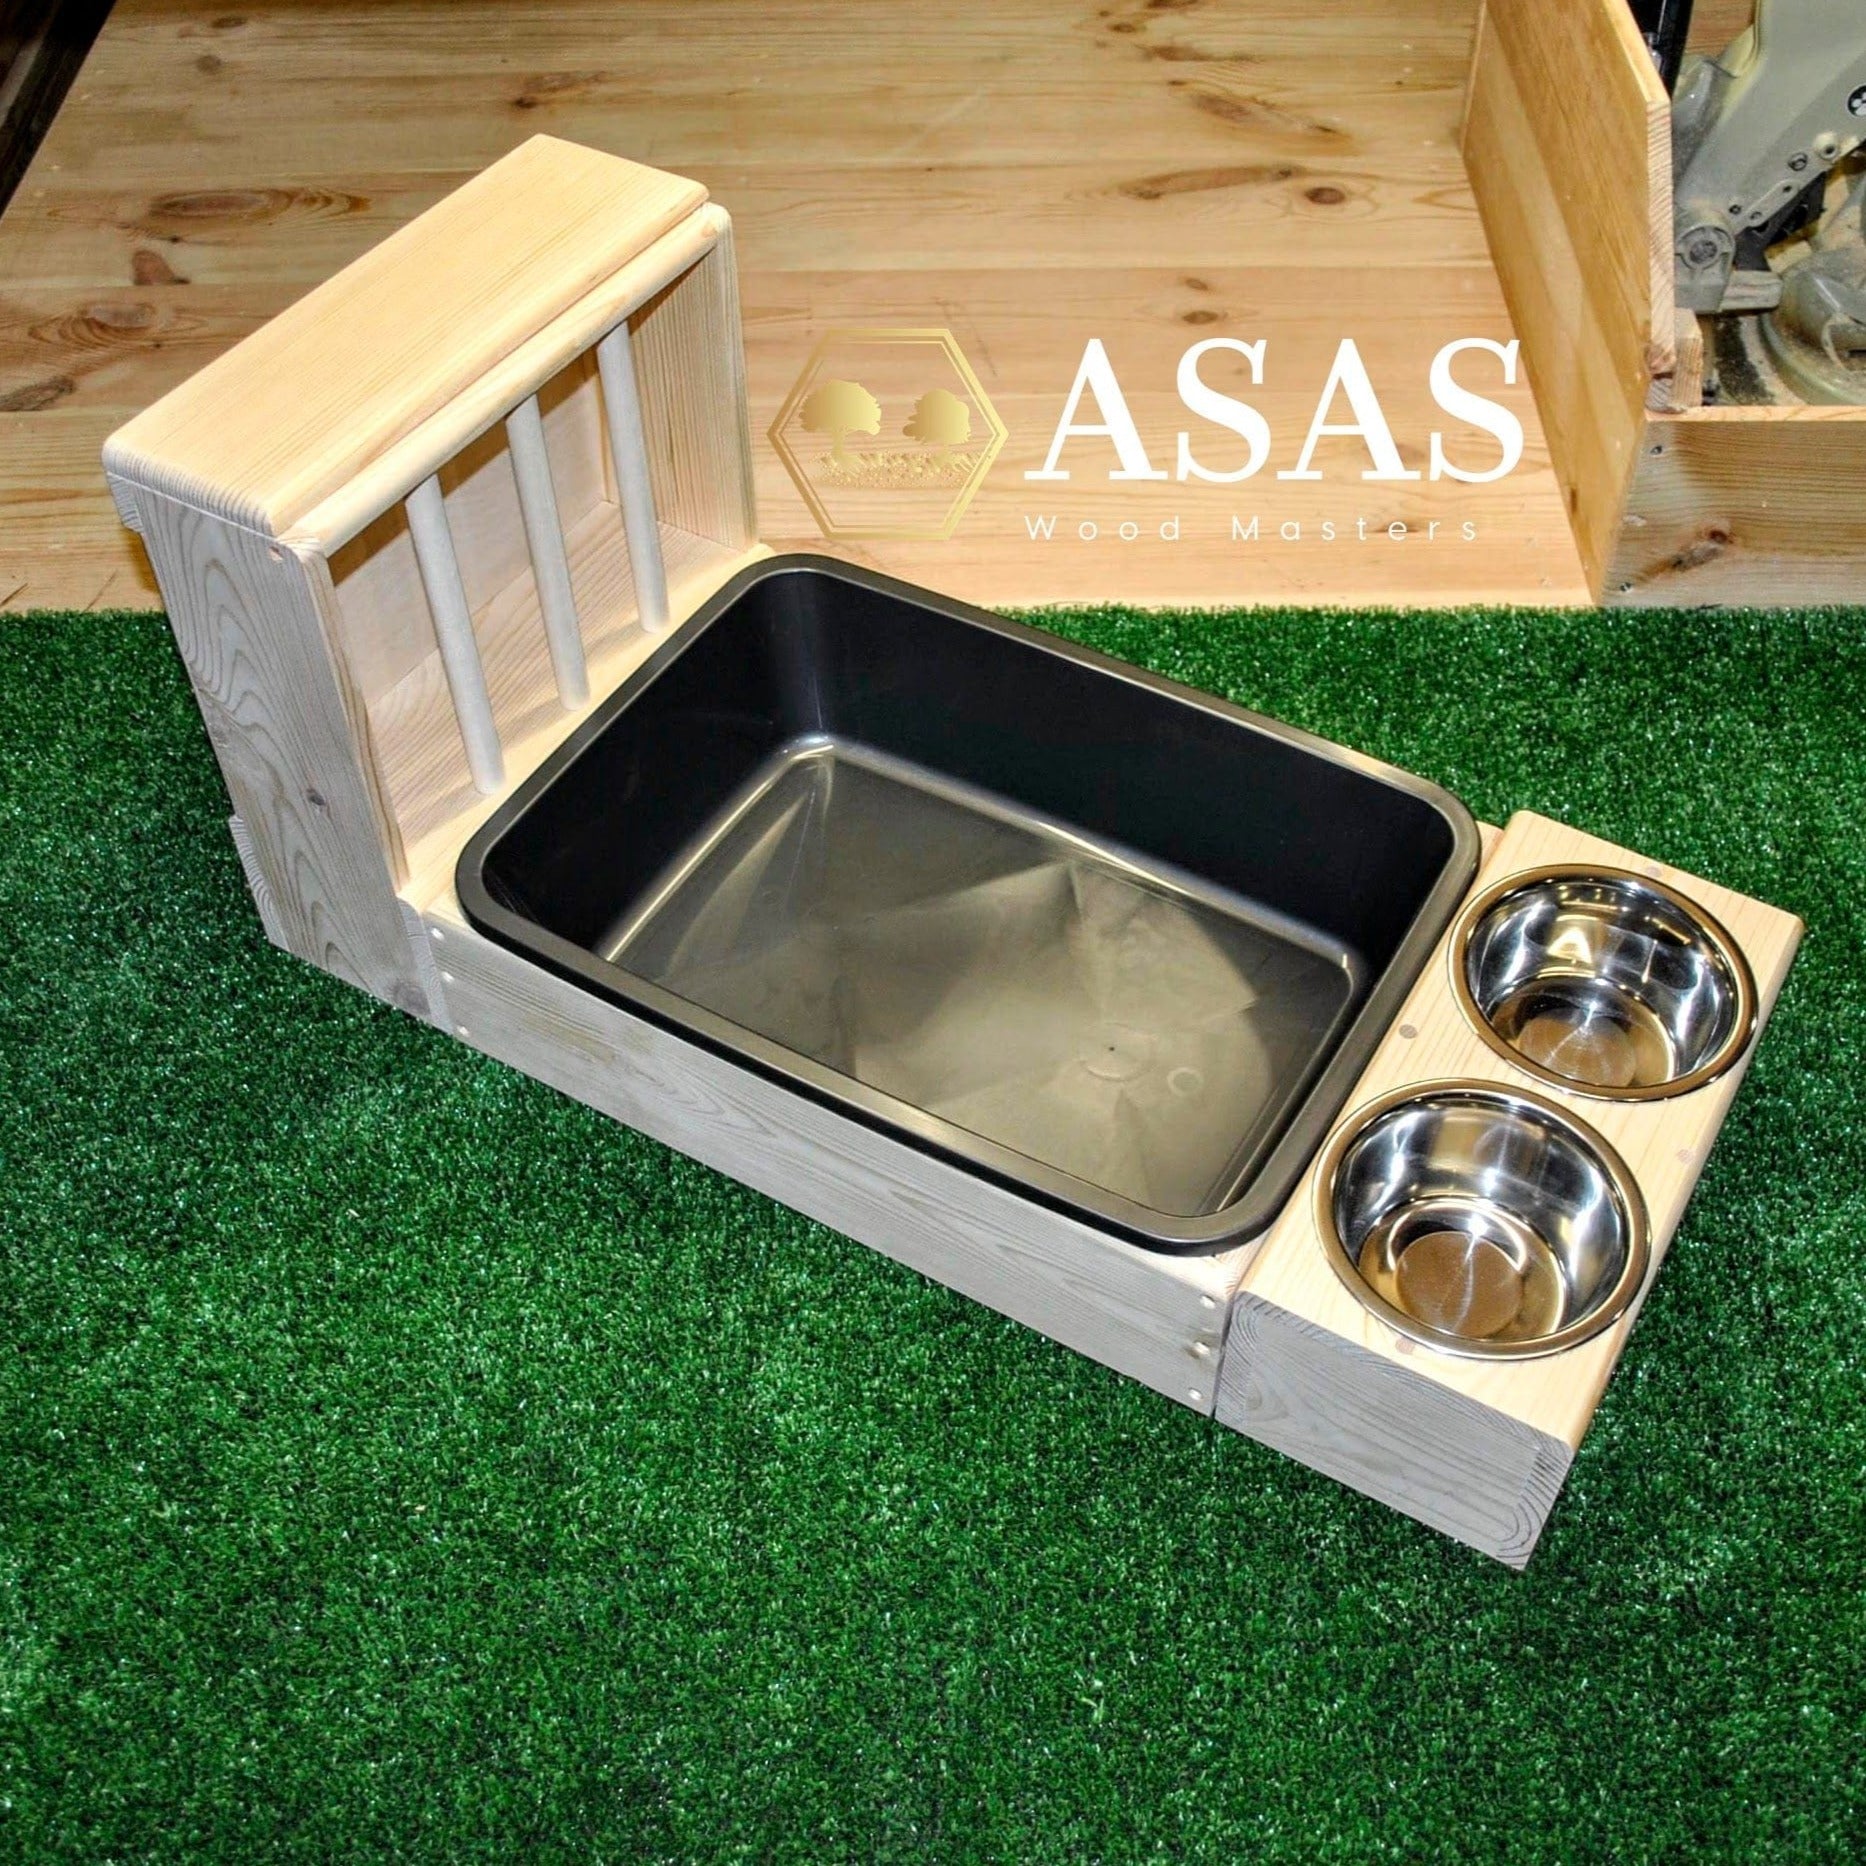 rabbit litter box, bunny hay feeder and metal food and drink bowl station combo, made by asaswood